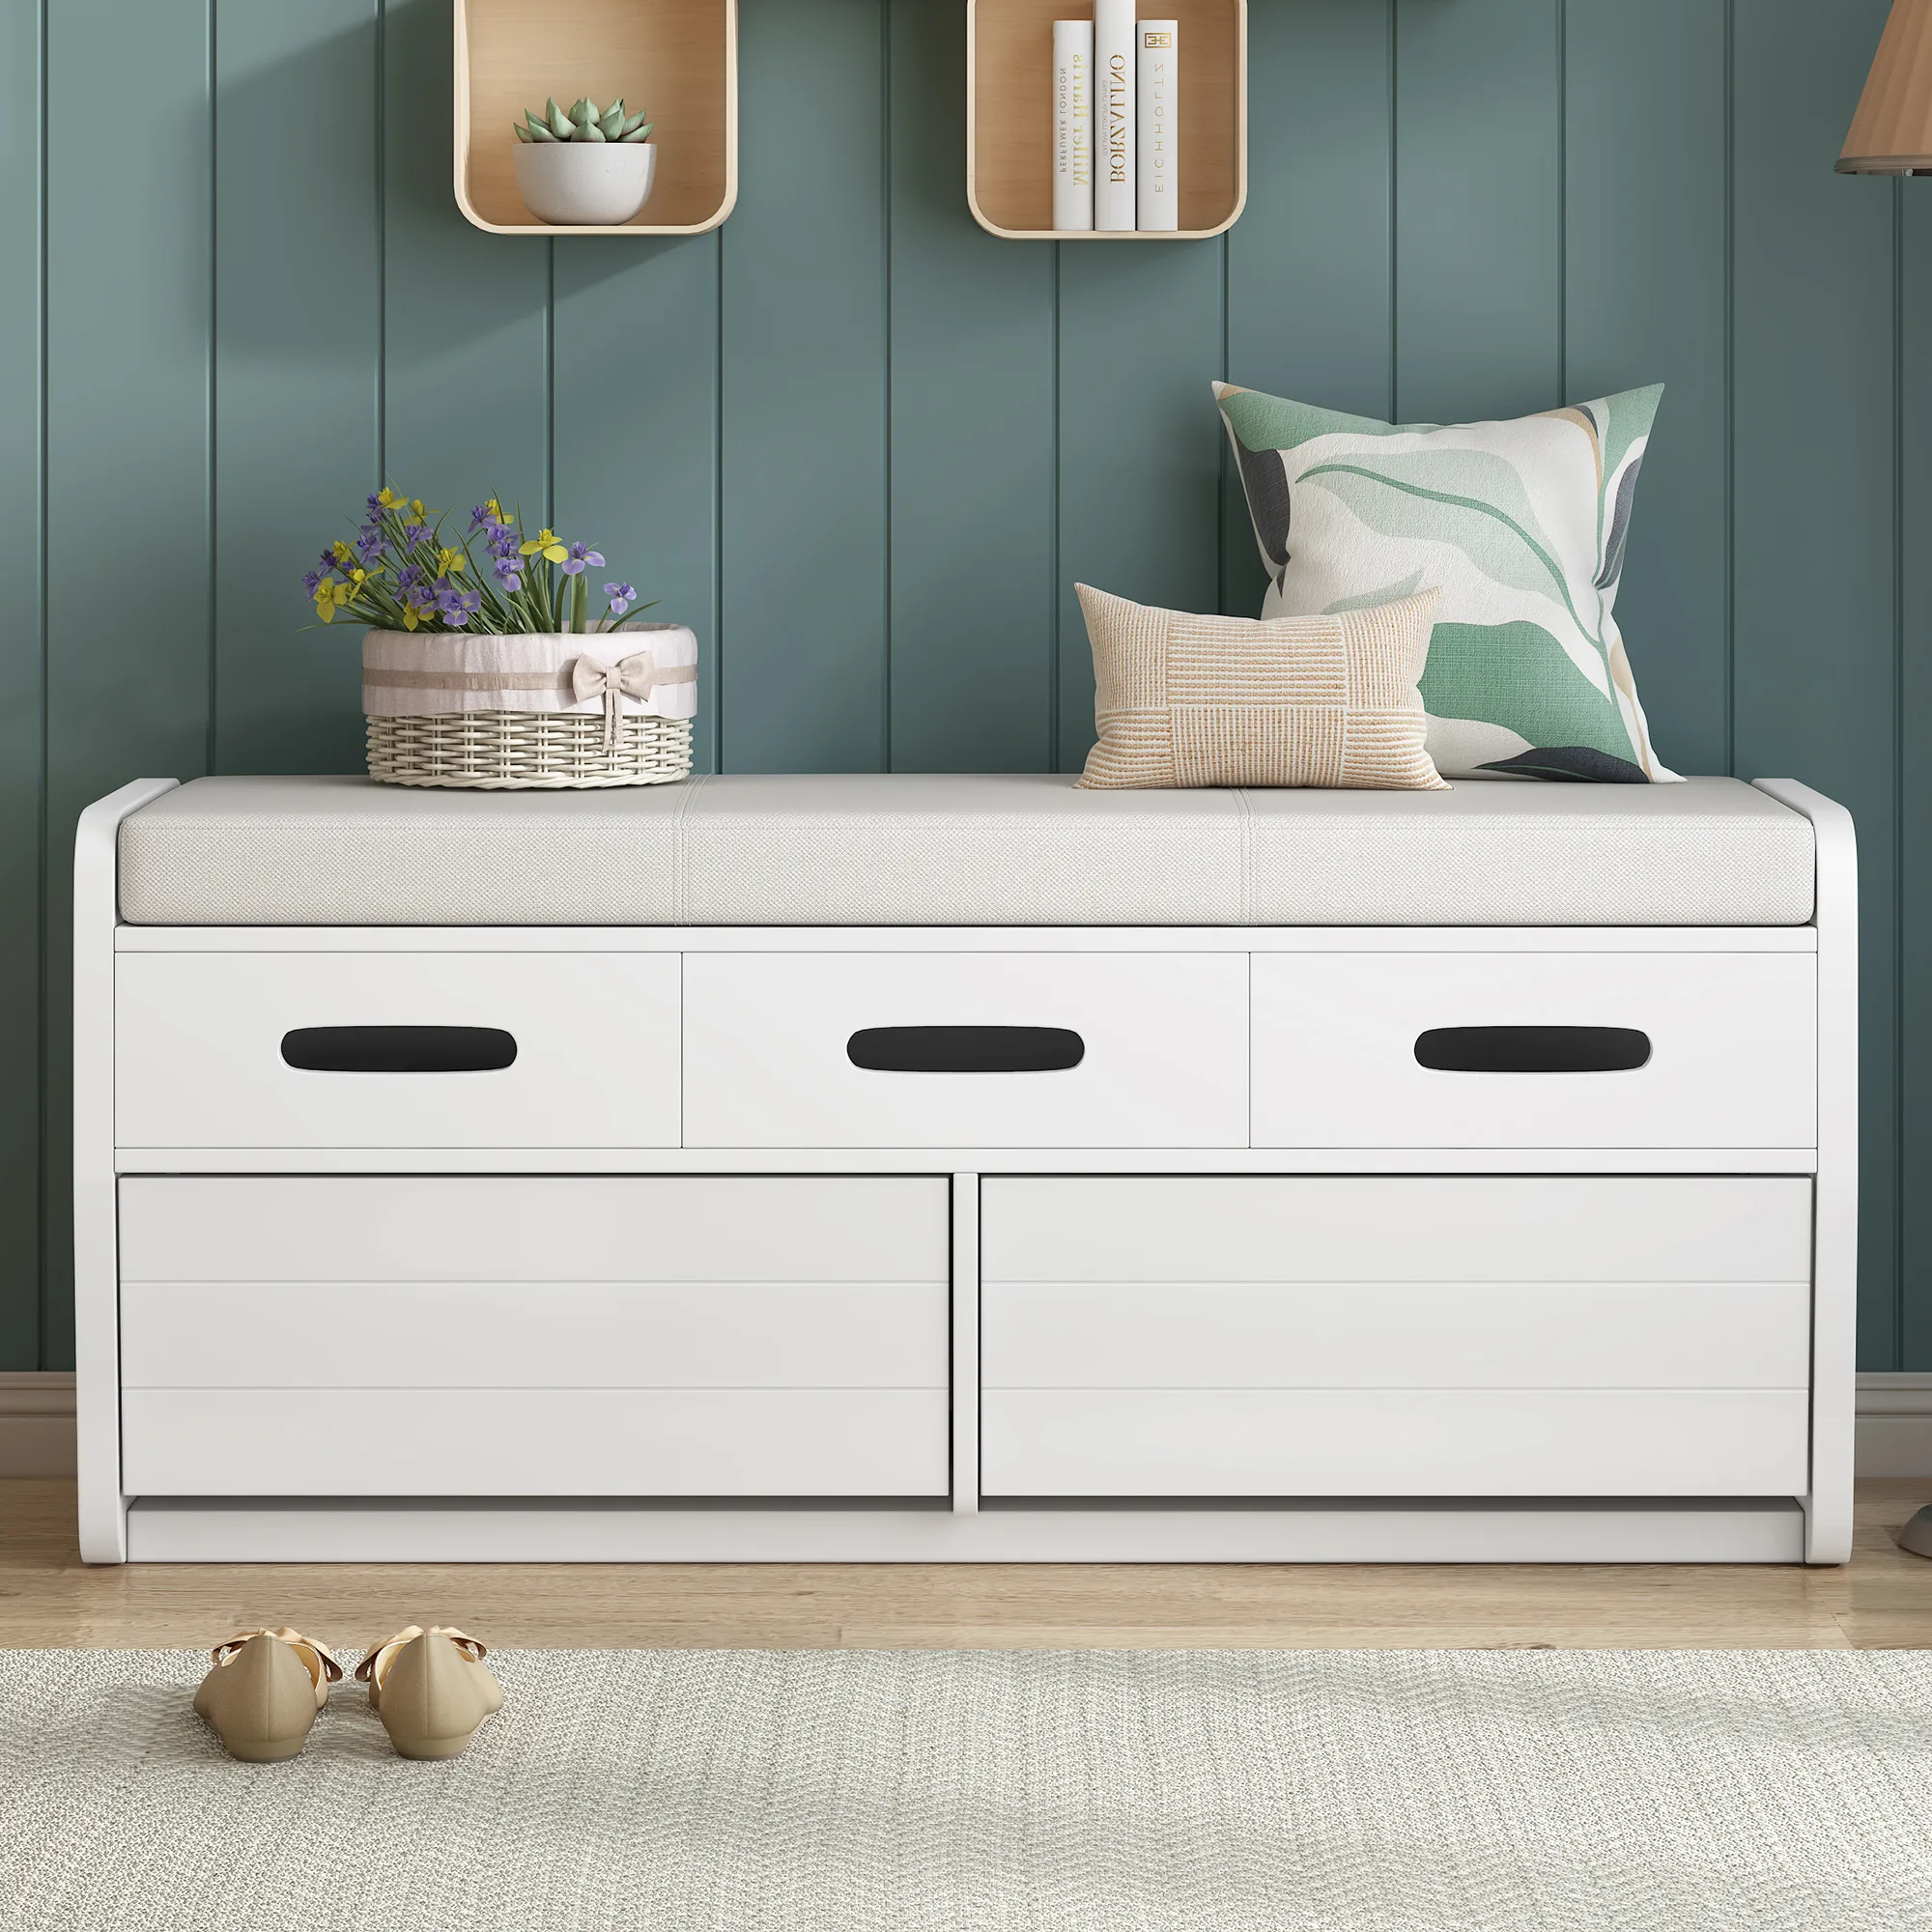 Merax Rustic Storage Bench with 2 Drawers